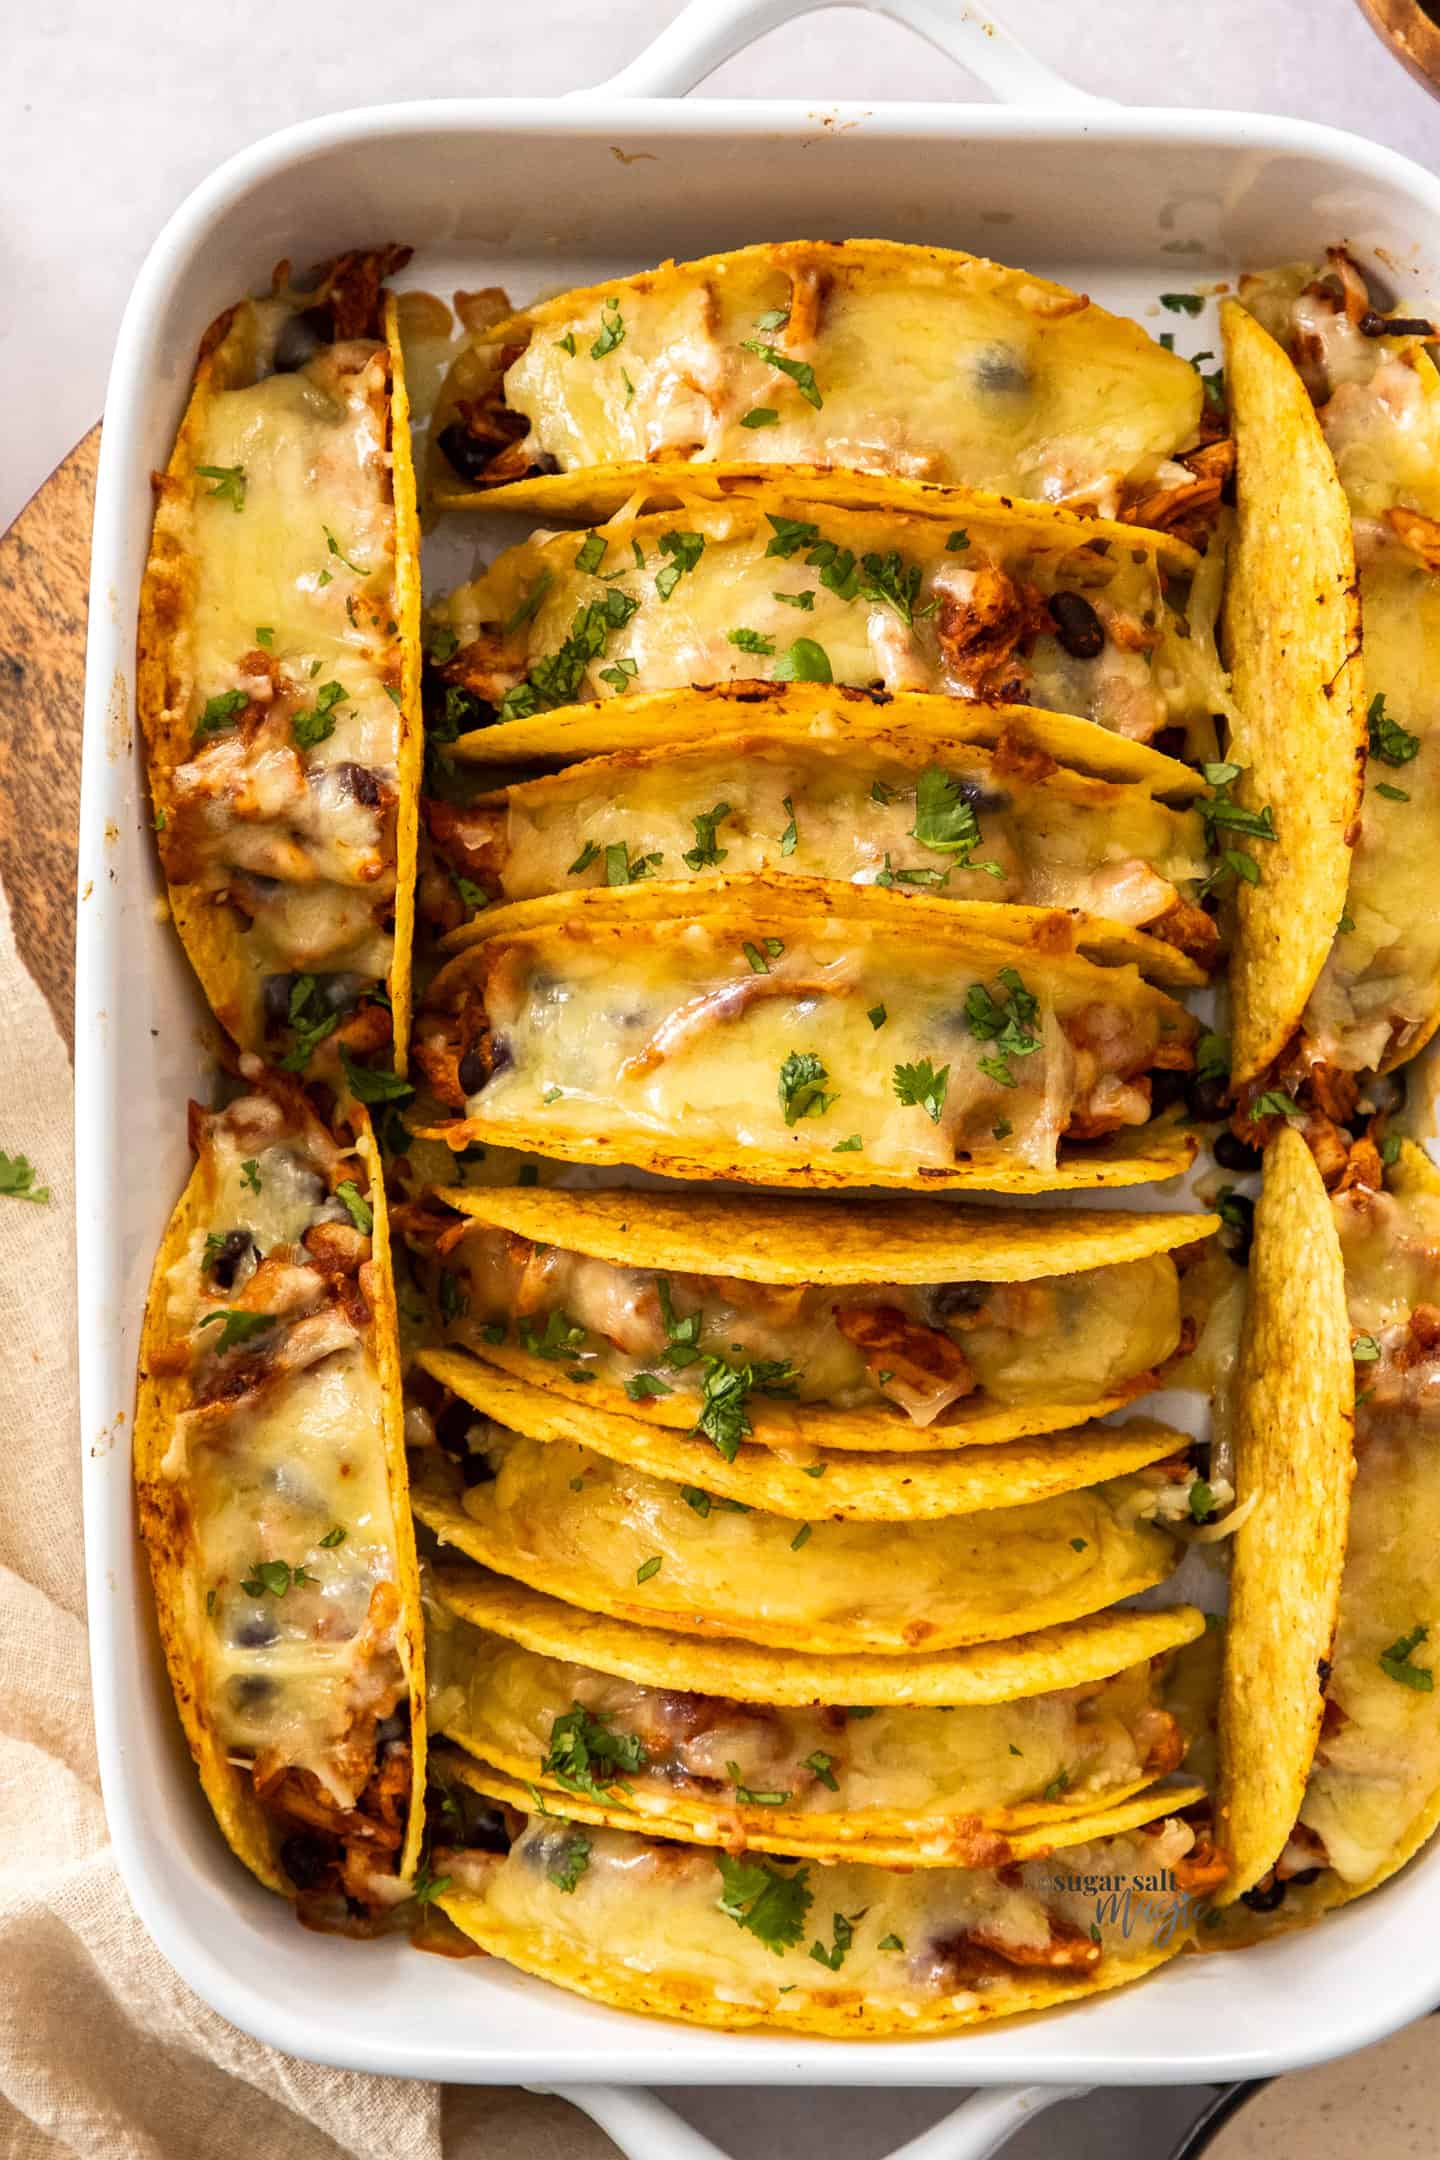 Baked tacos in a baking dish.